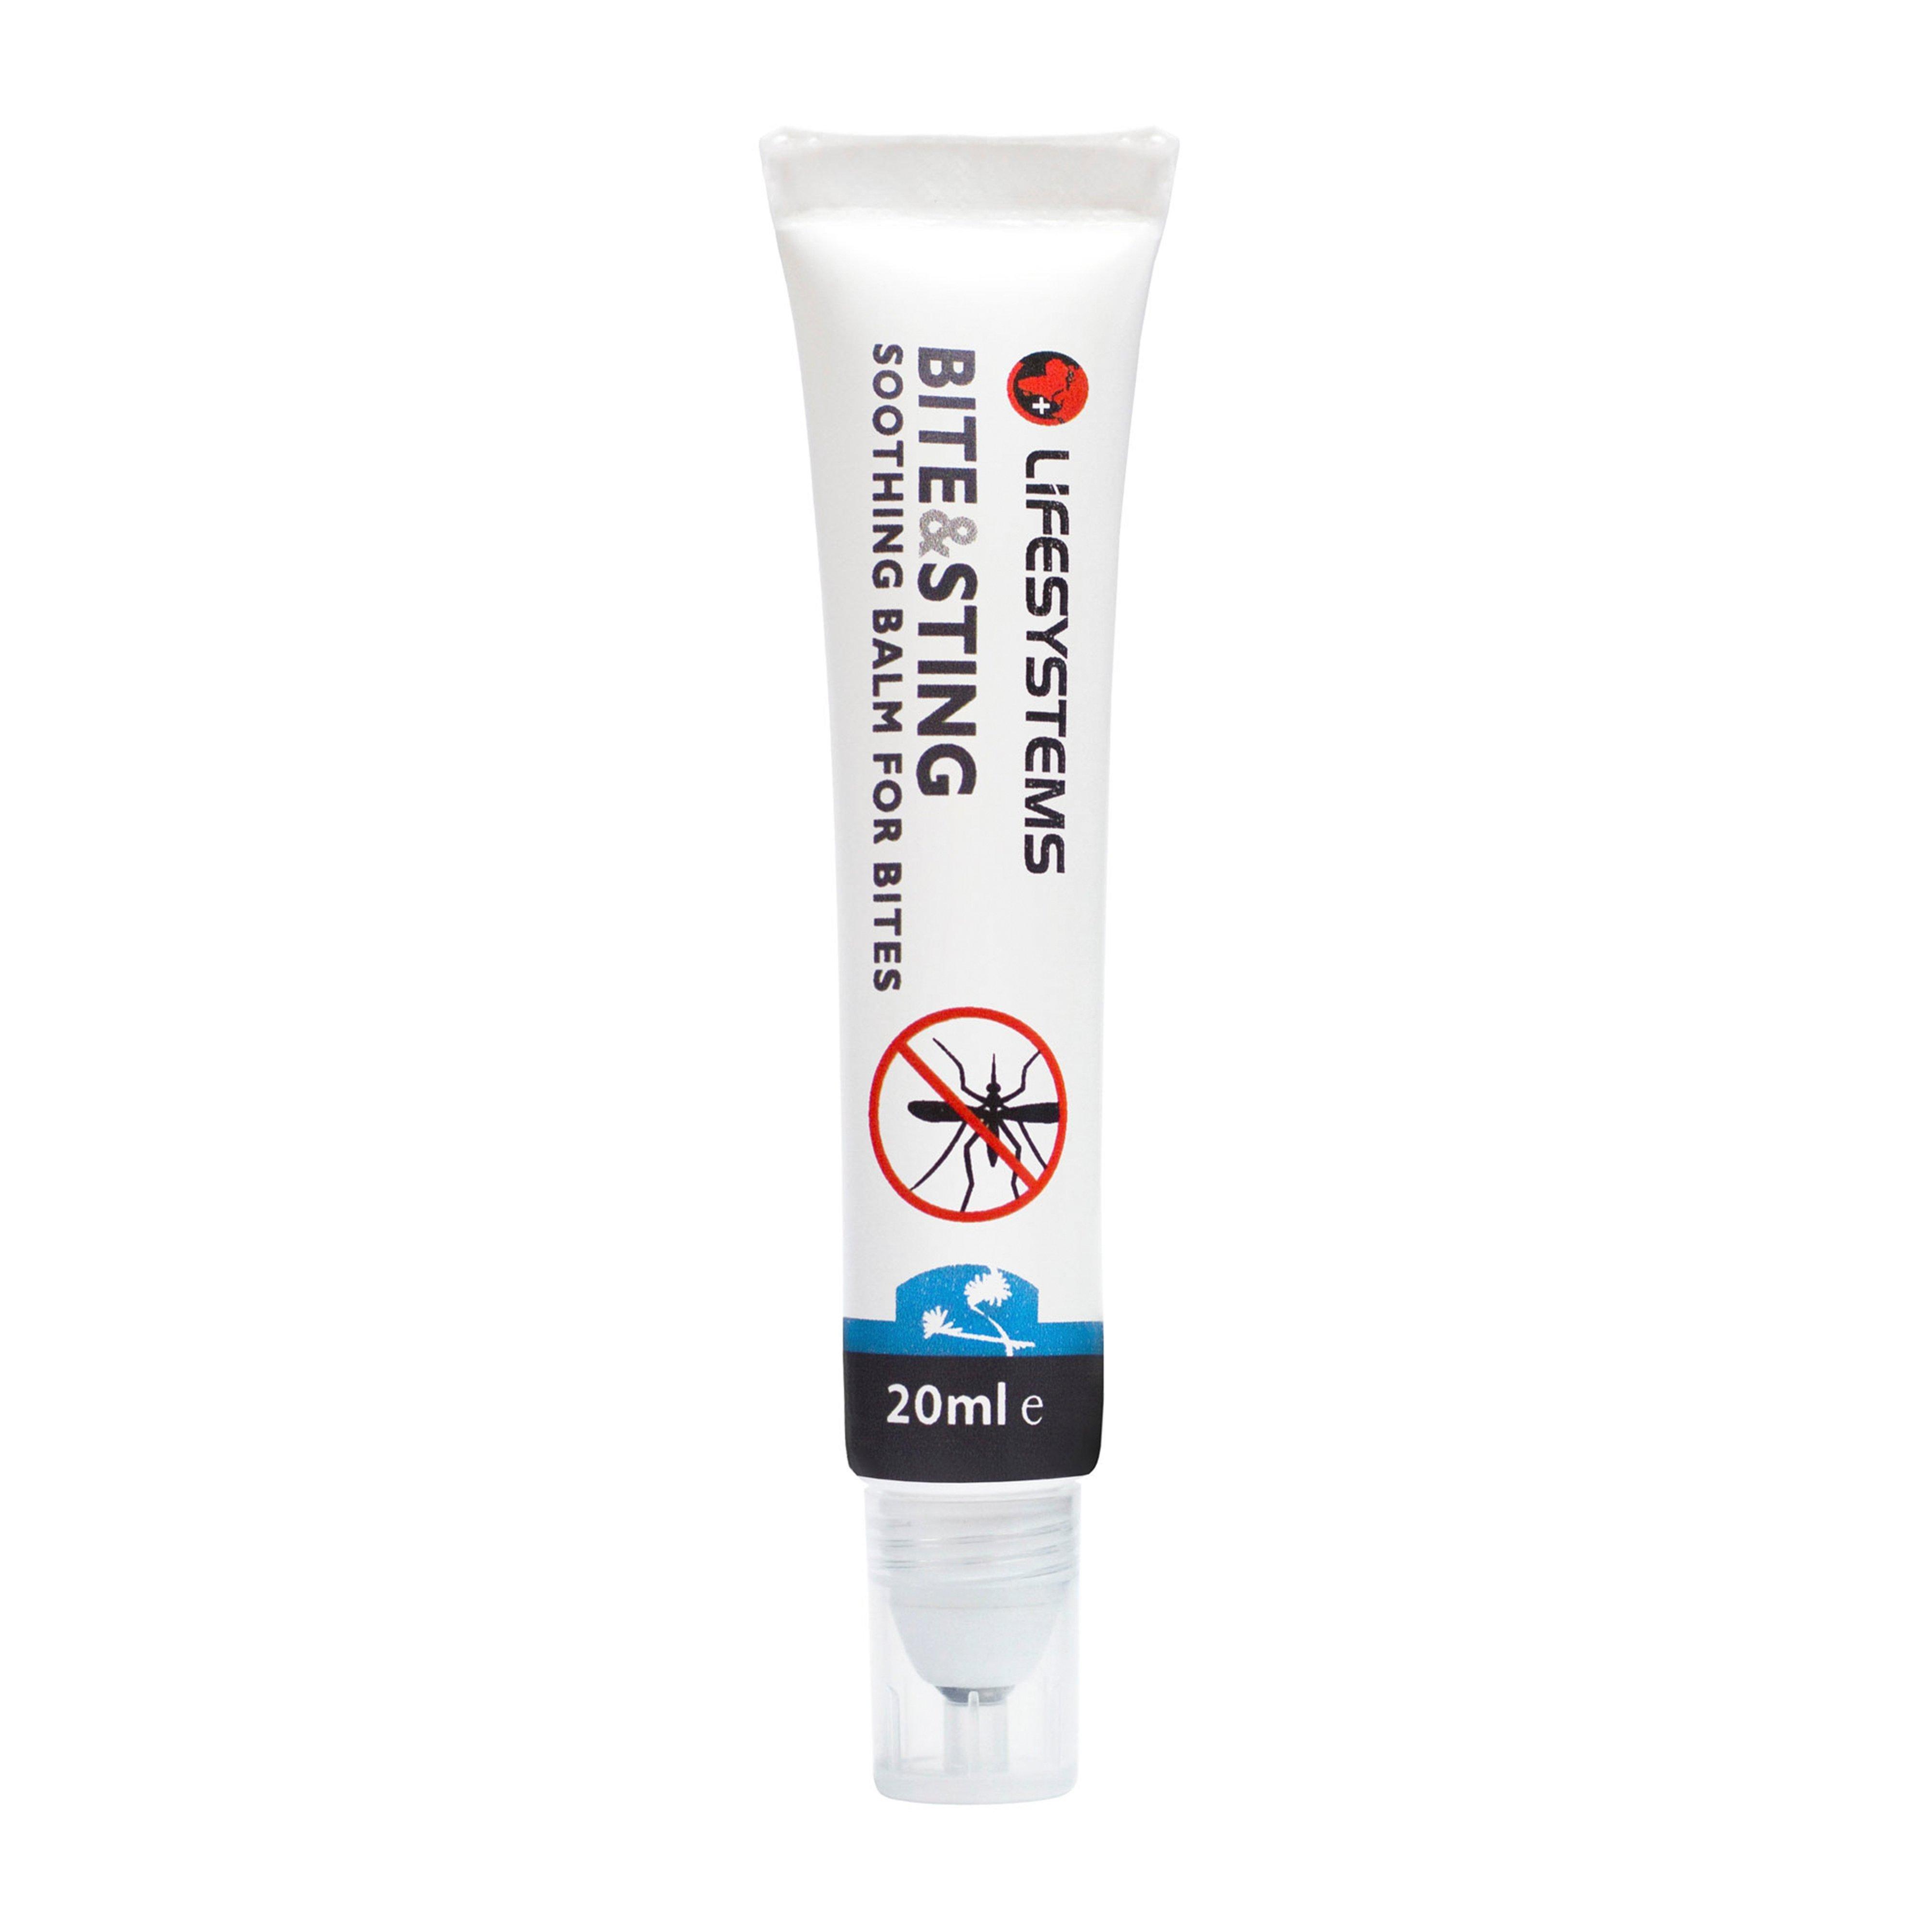 Lifesystems Bite and Sting Relief 20ml Roll-On Review